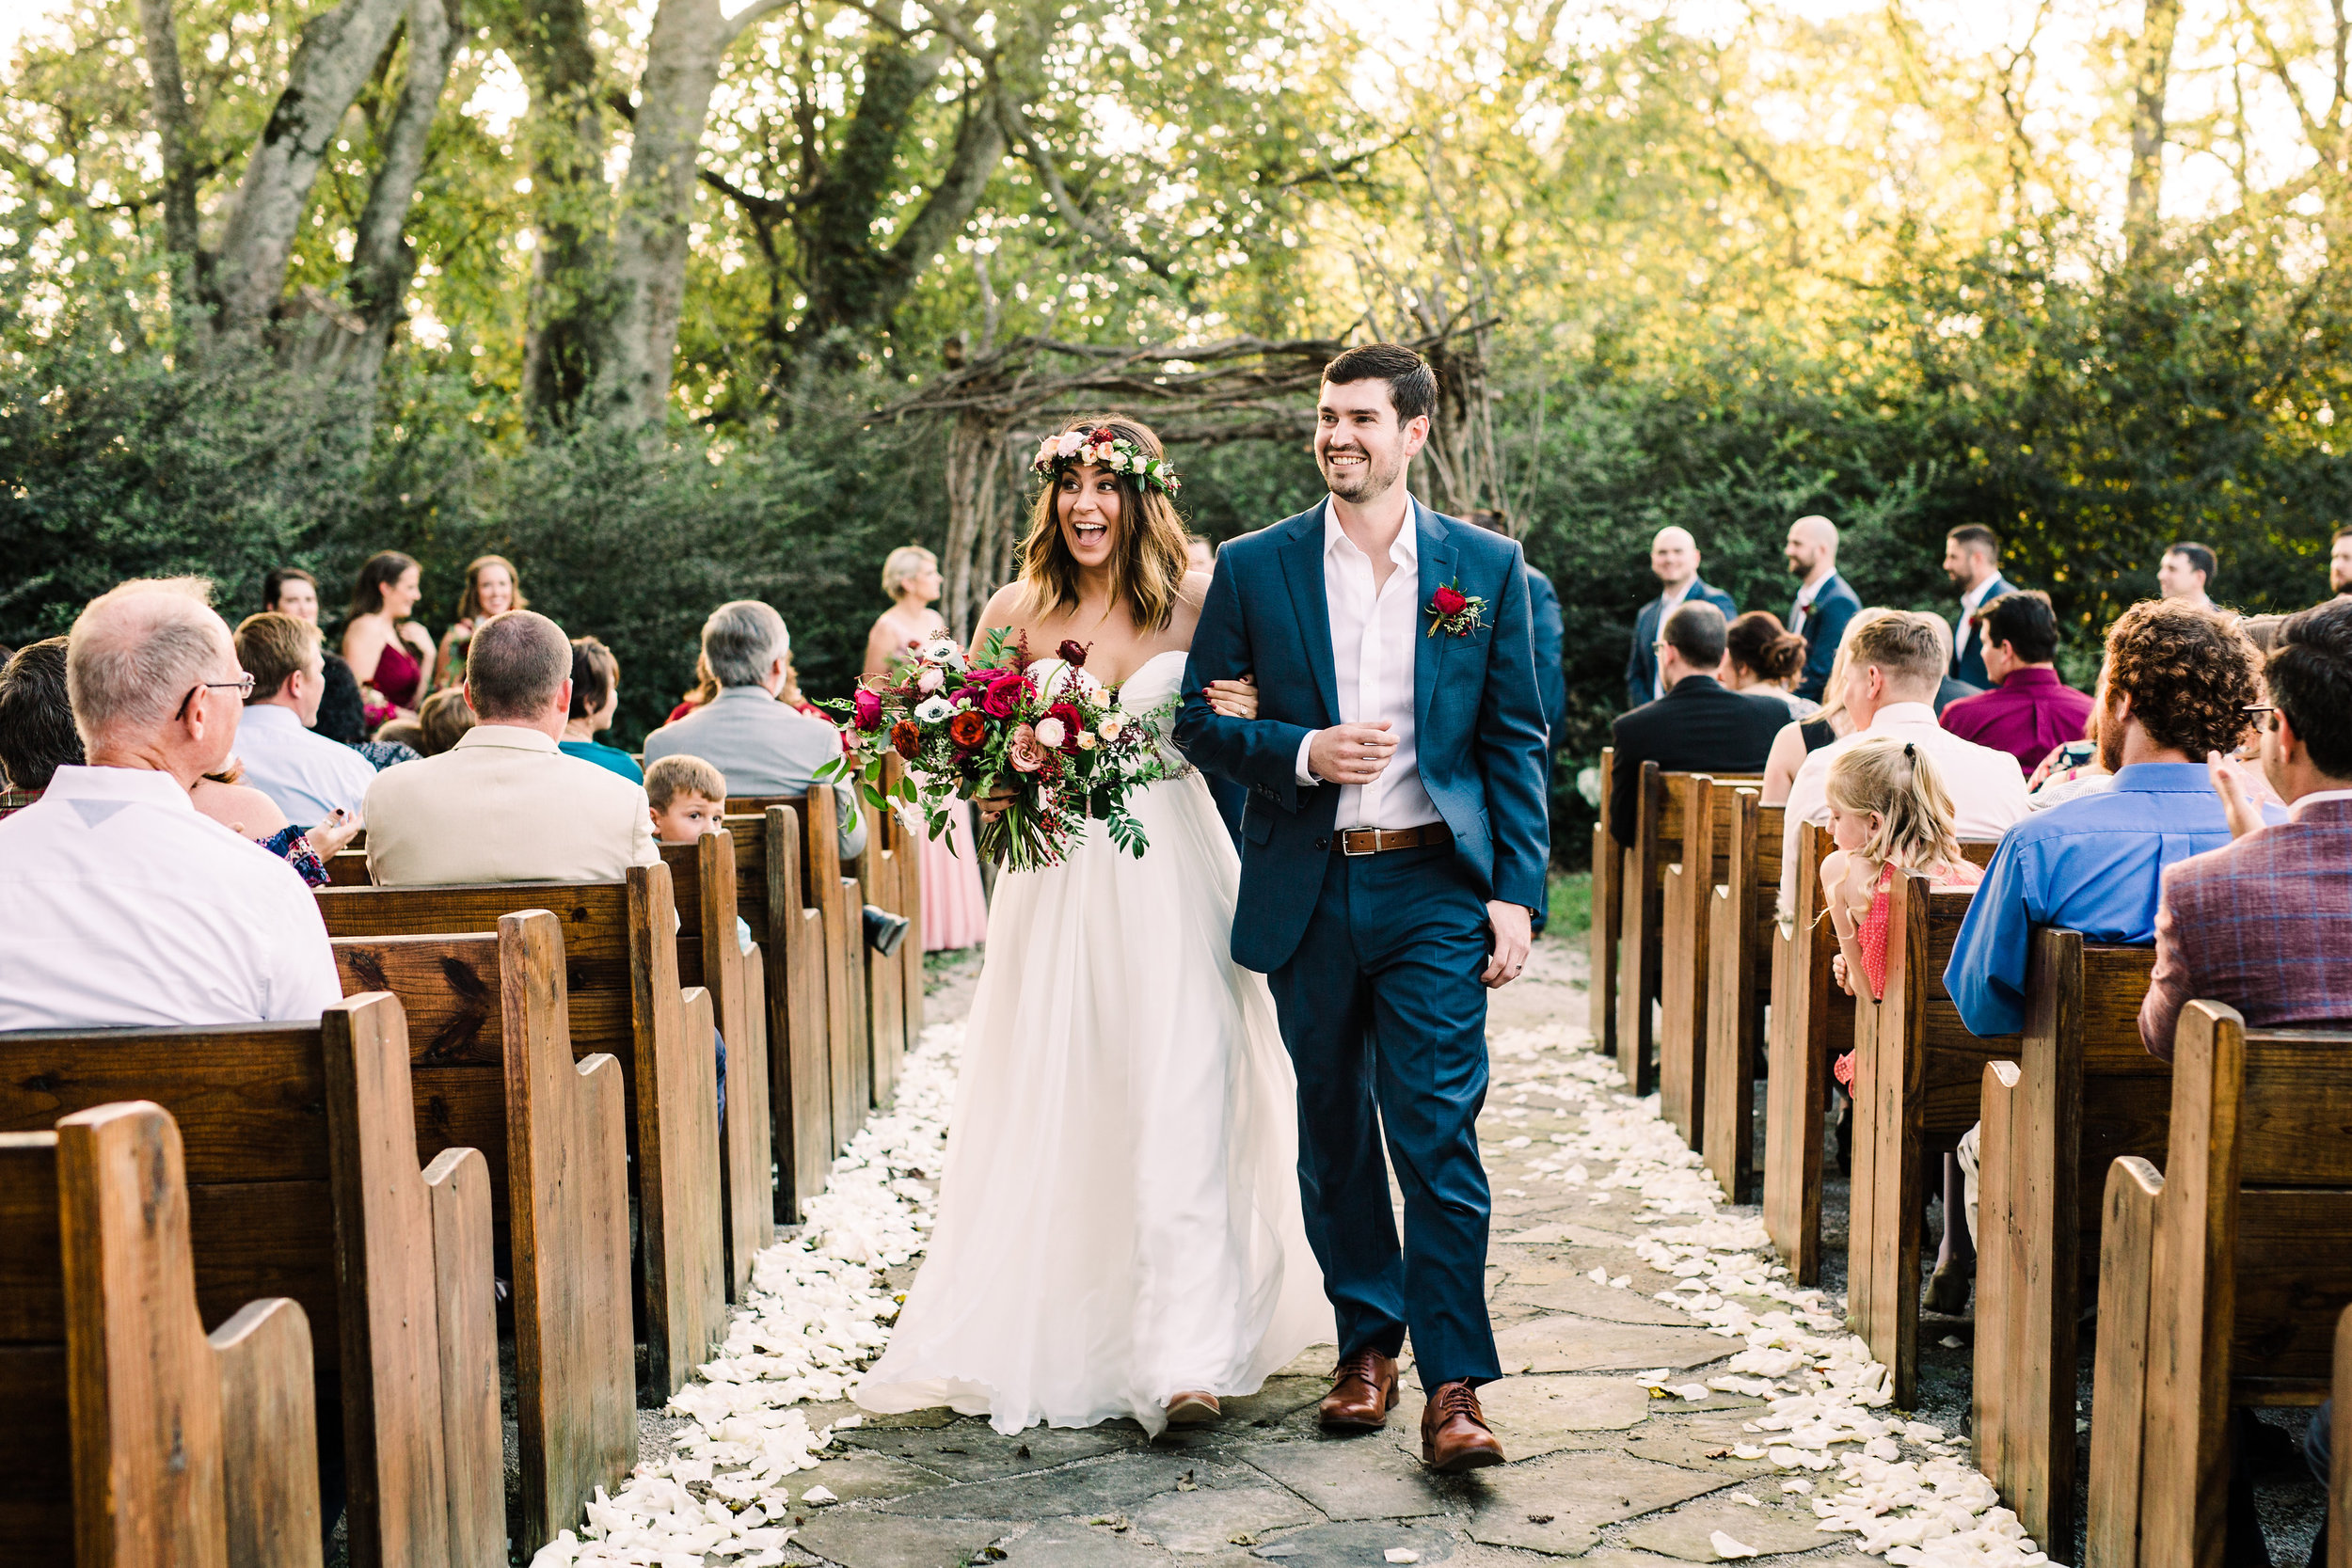 Meadow Hill Farm Wedding Ceremony with rose petal aisle